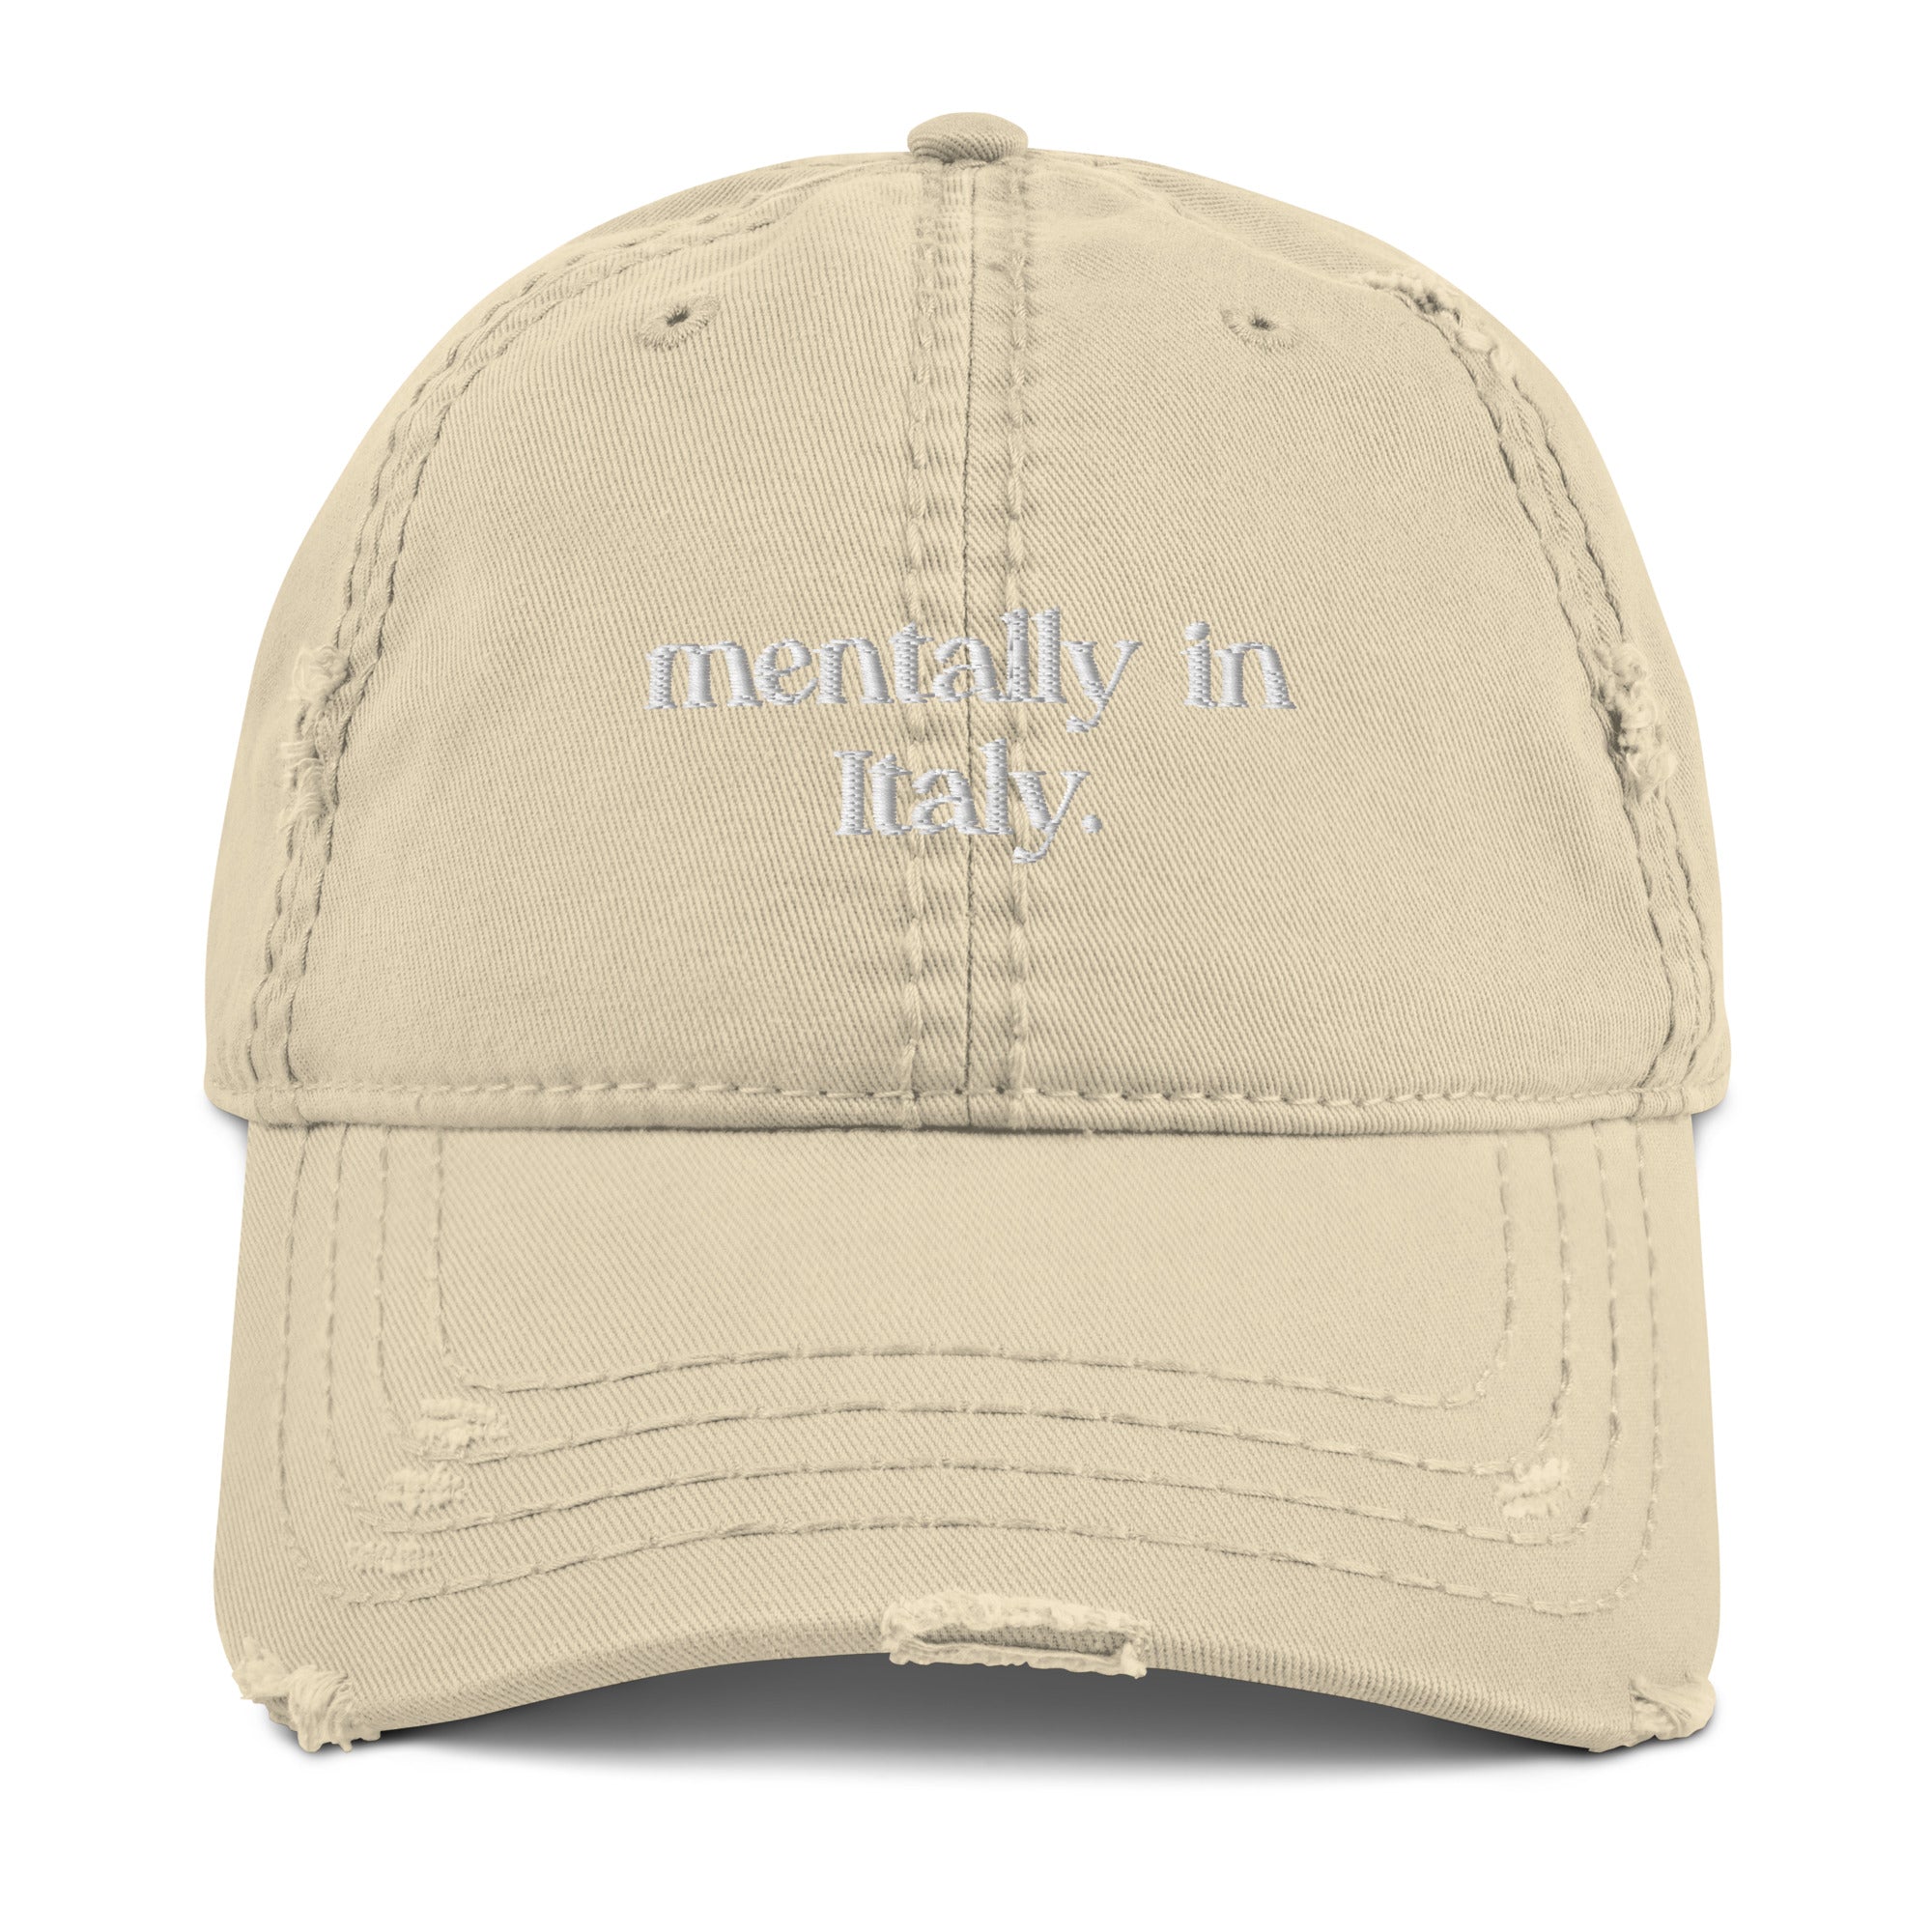 Mentally in Italy - Distressed Dad Hat